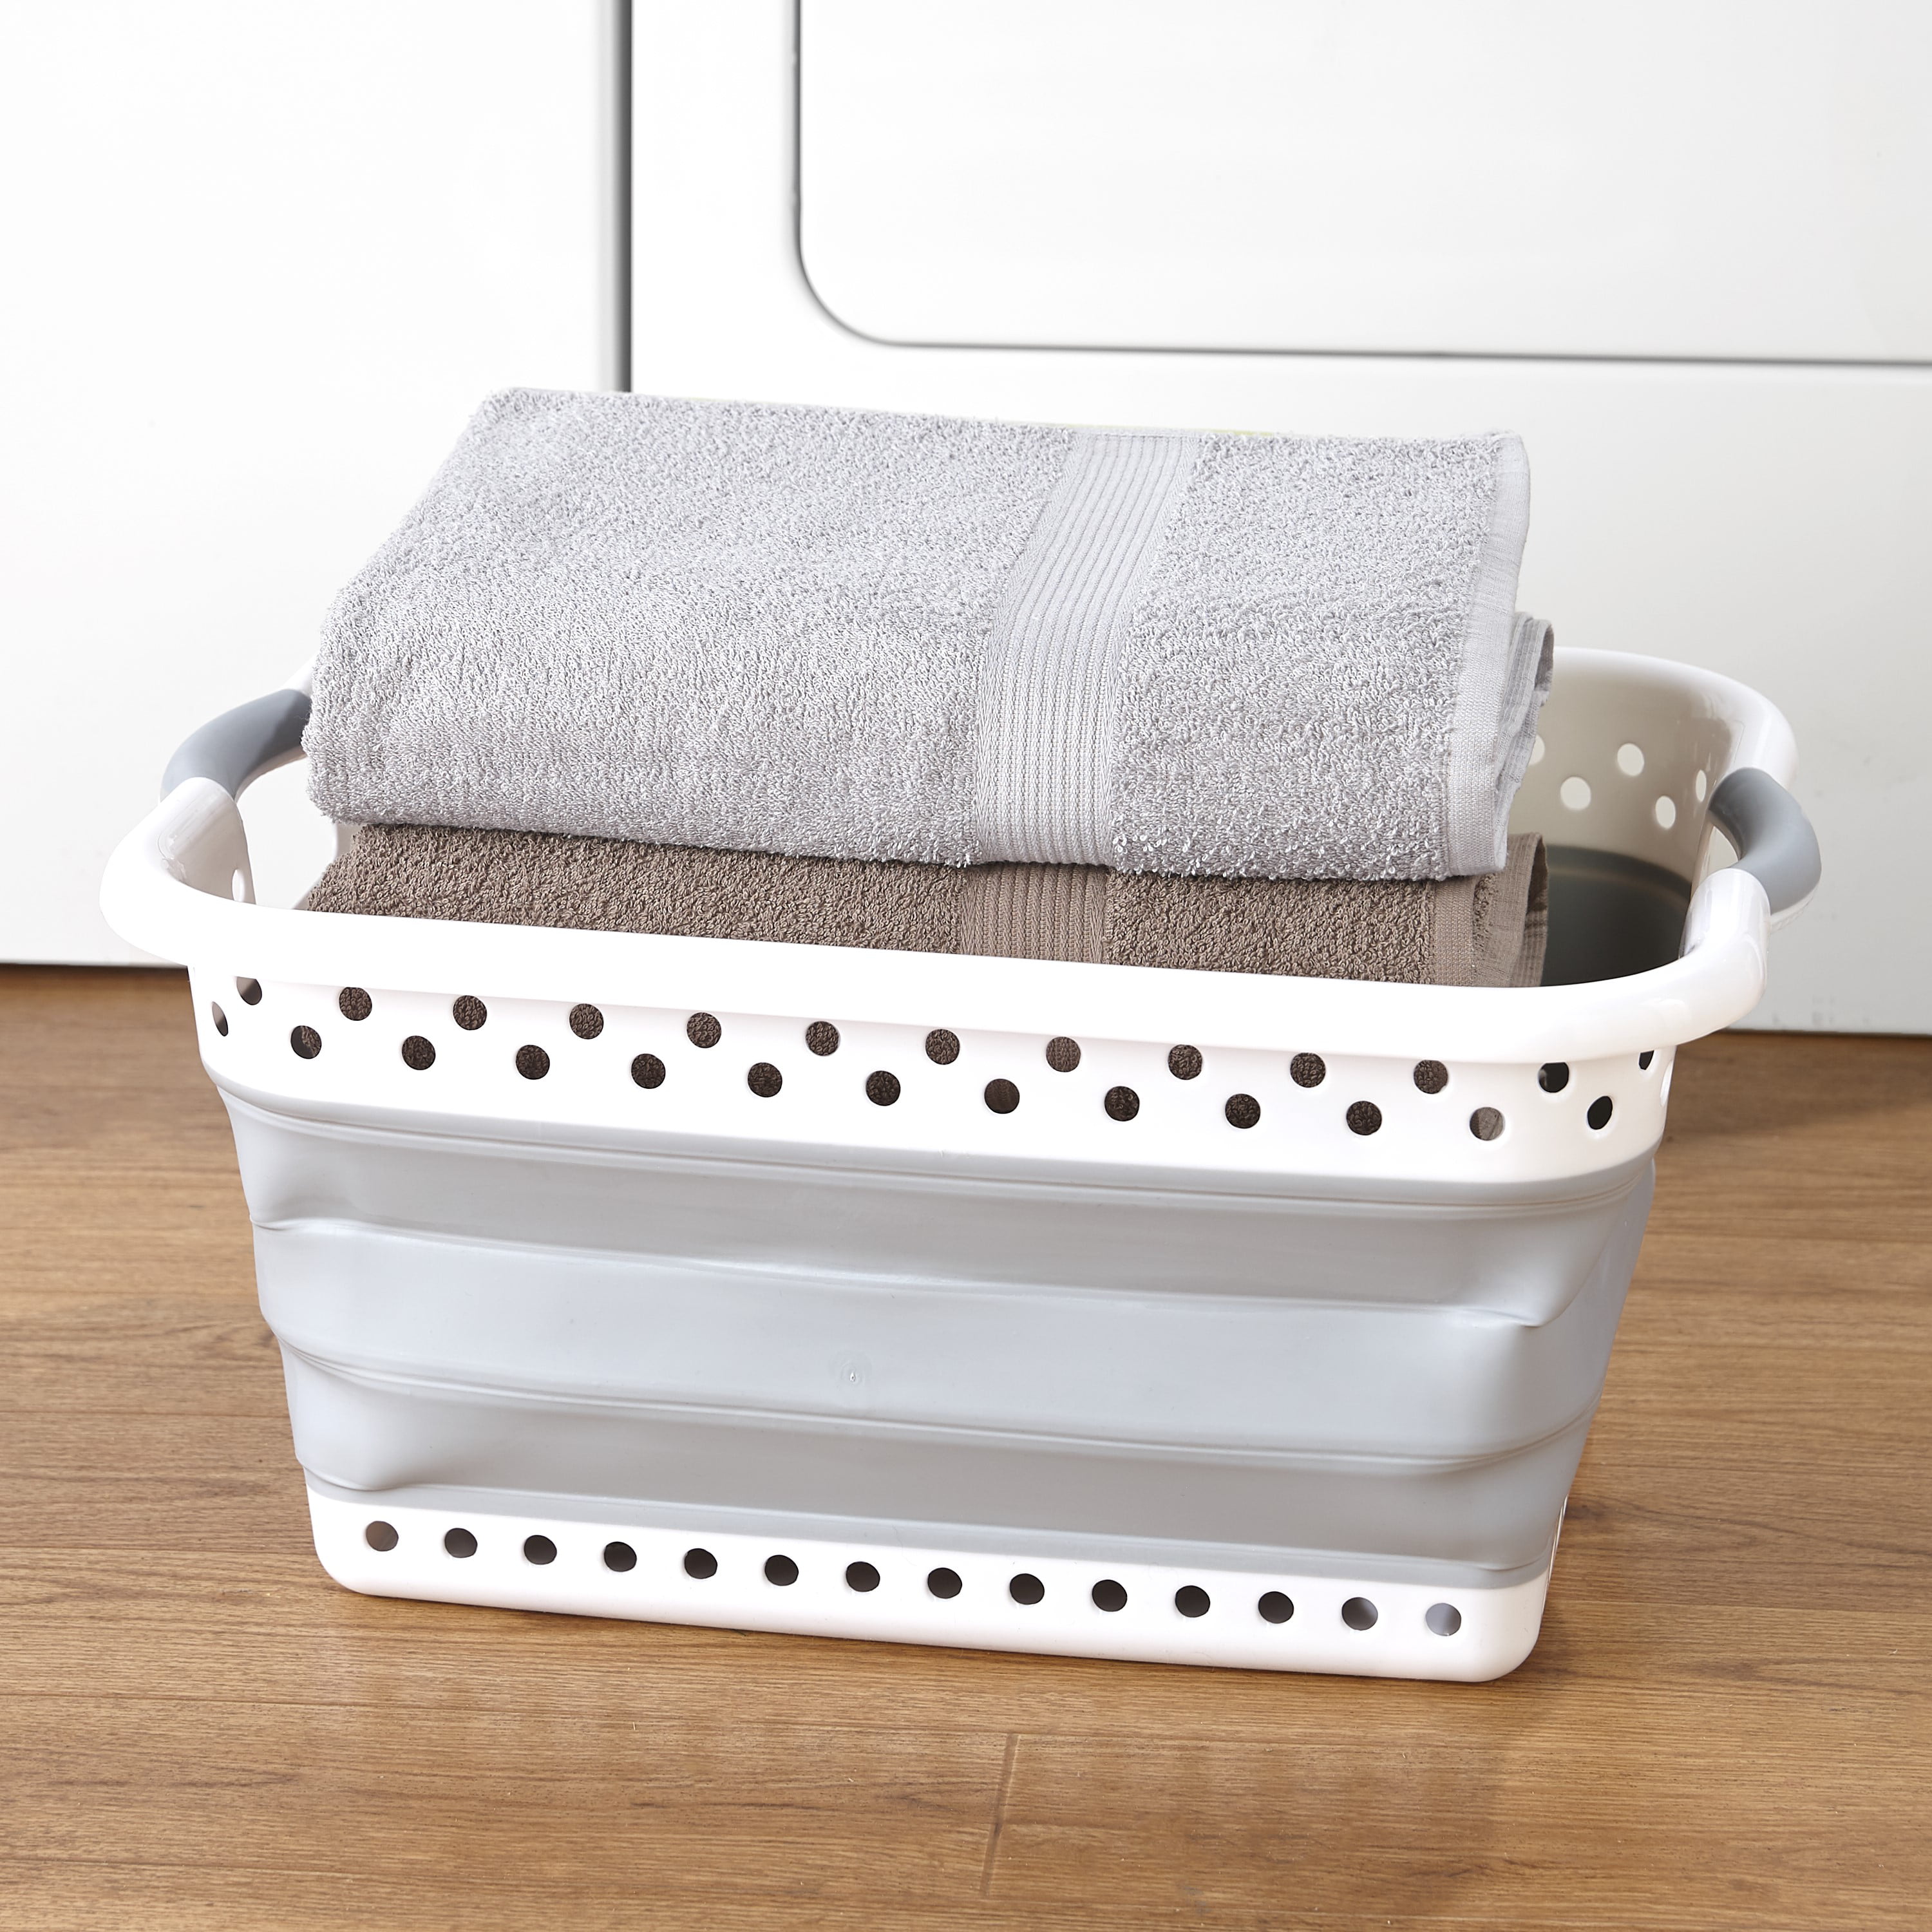 efluky Laundry Basket, Collapsible Laundry Hamper for Laundry Room and  Bedroom, Versatile Storage Ba…See more efluky Laundry Basket, Collapsible